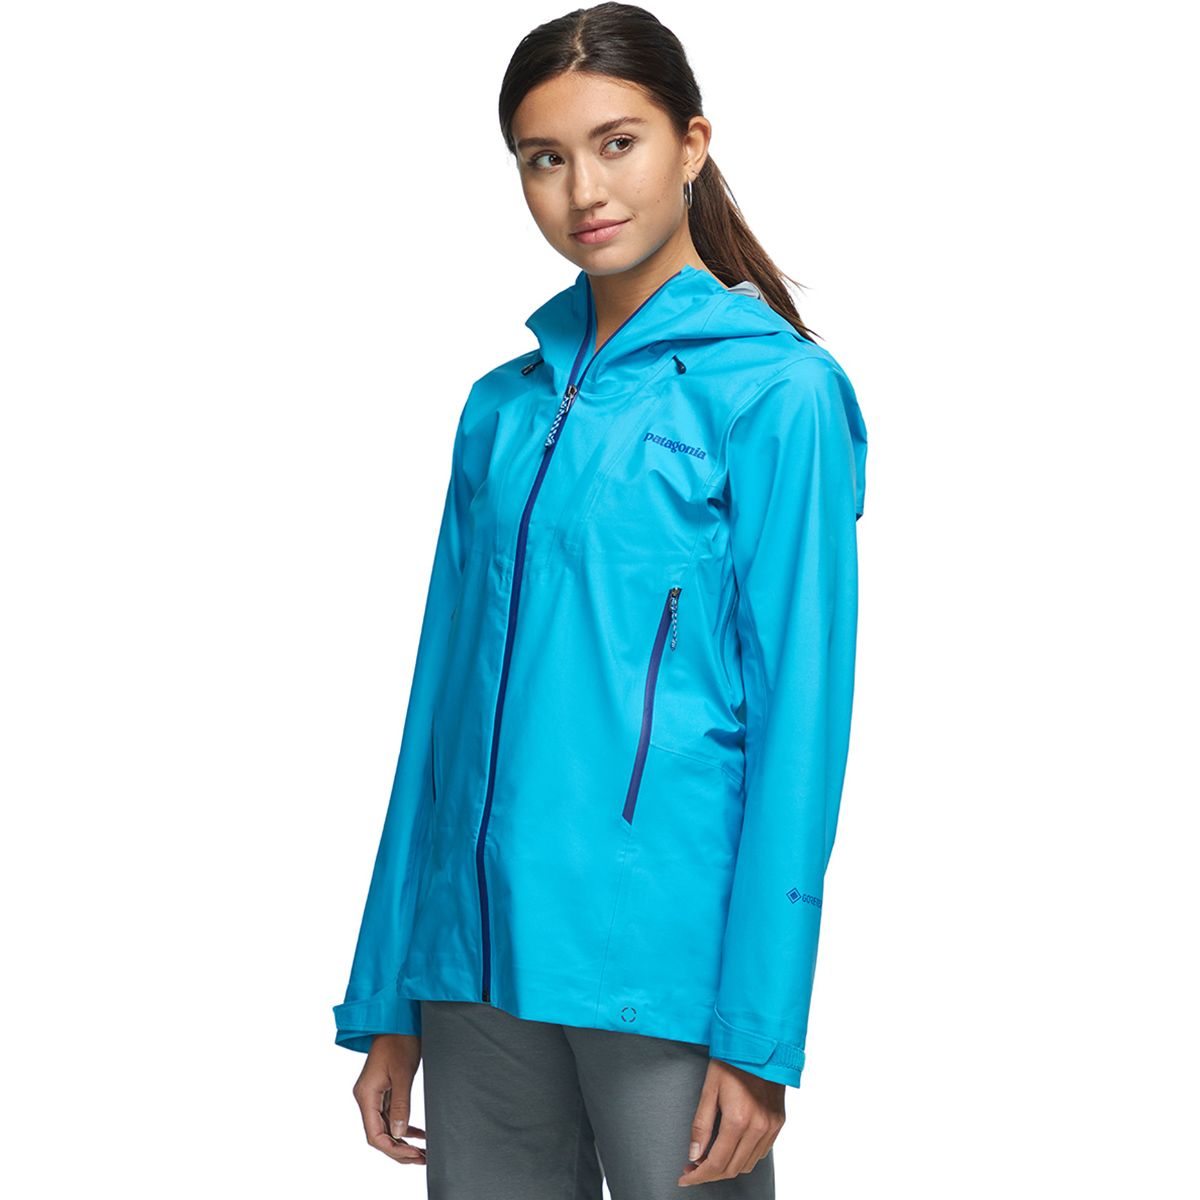 Patagonia Ascensionist GTX Jacket - Women's